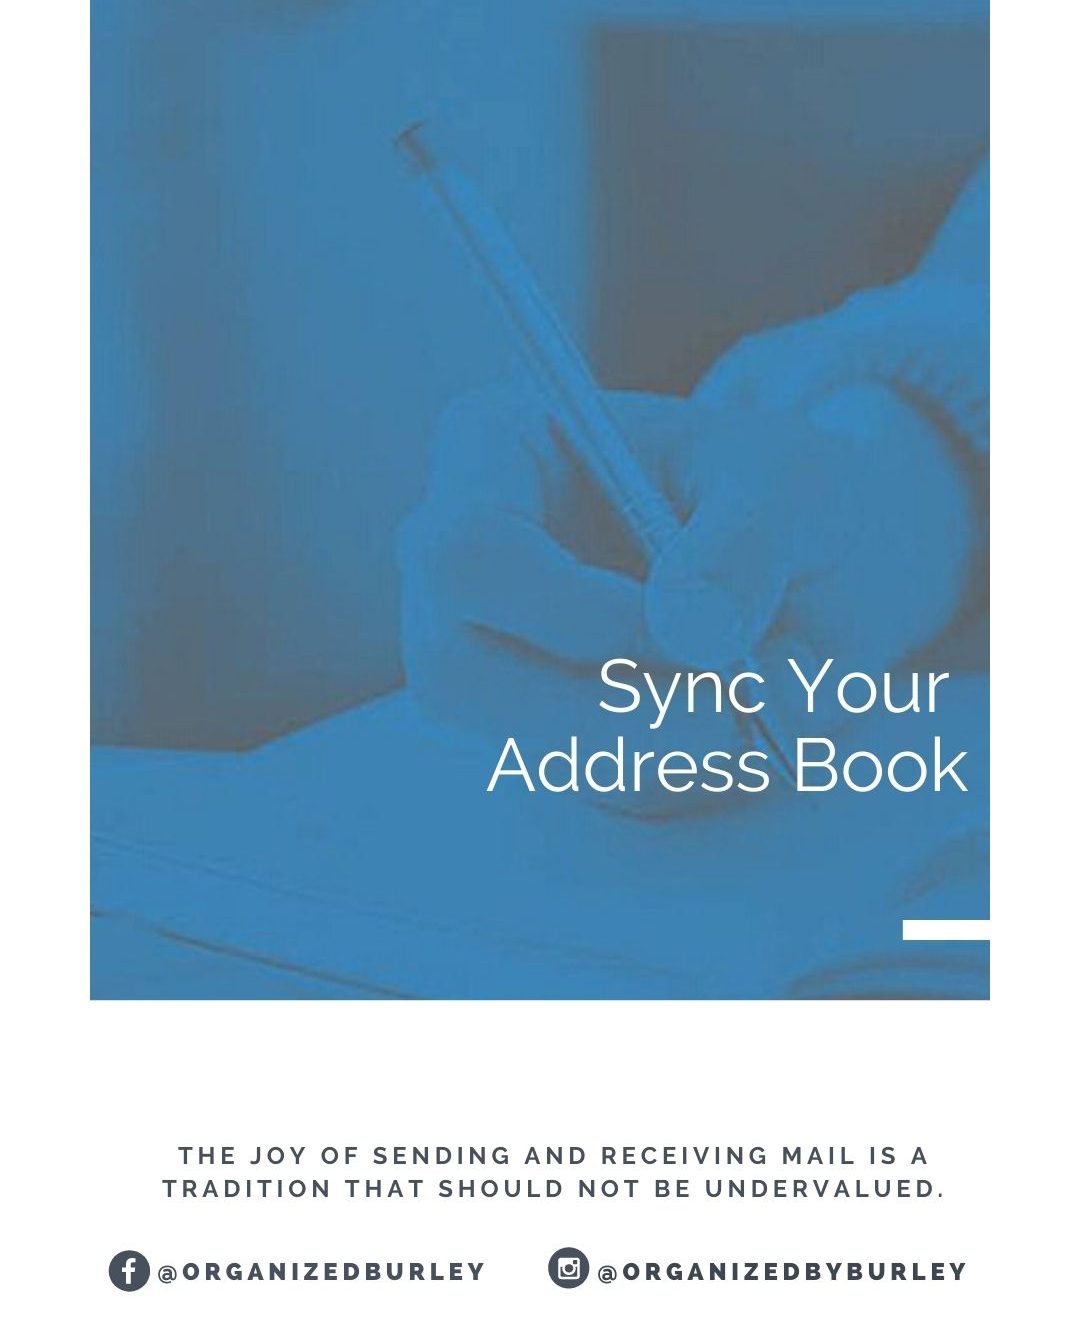 How To Sync Your Address Book